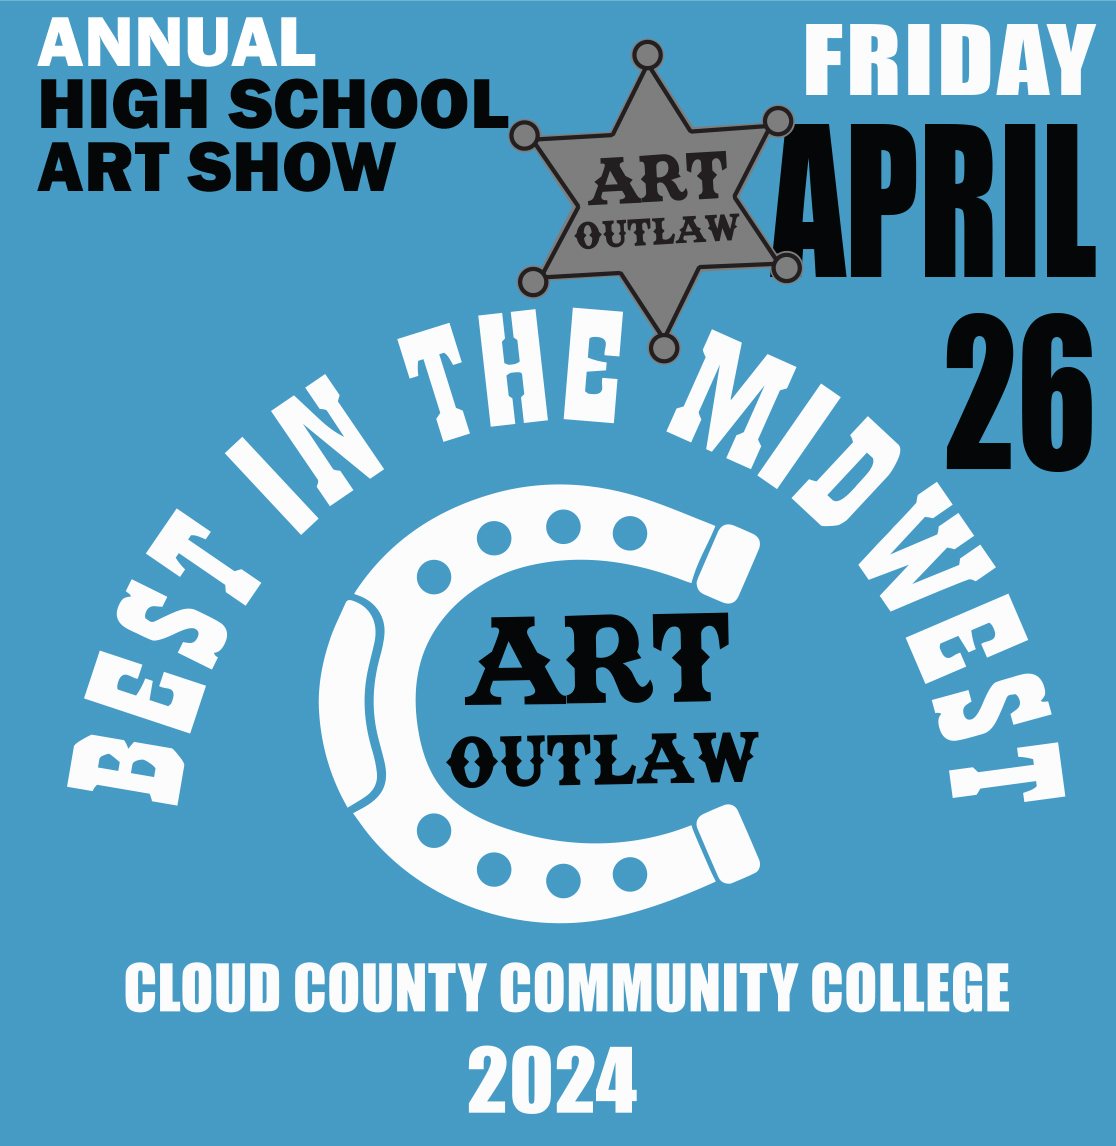 The 2024 High School Art Show is April 26.